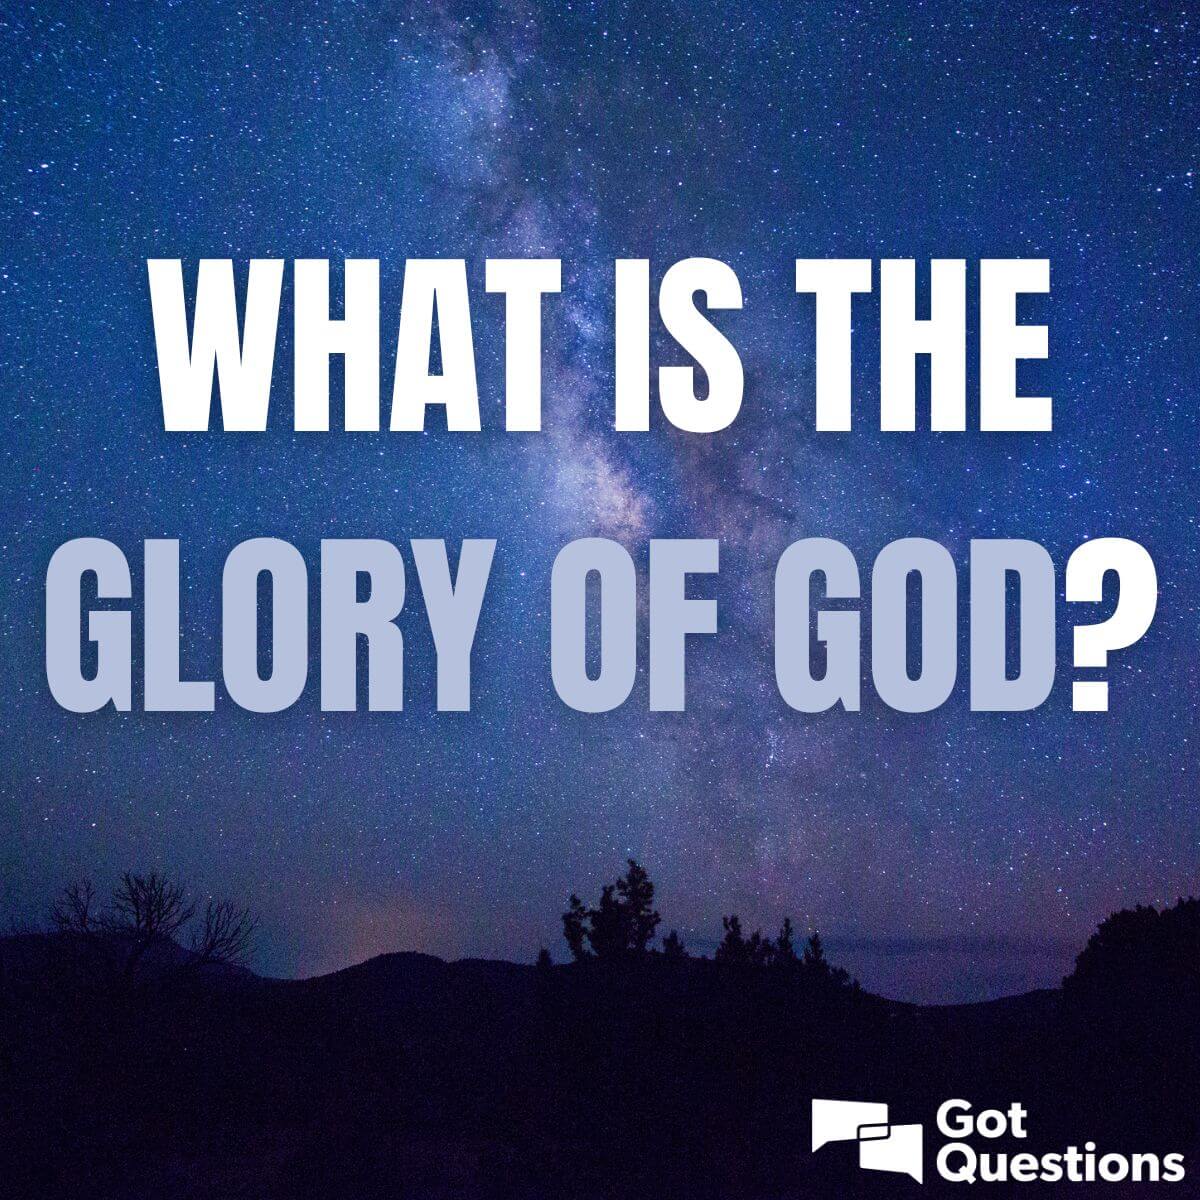 What is the glory of God?